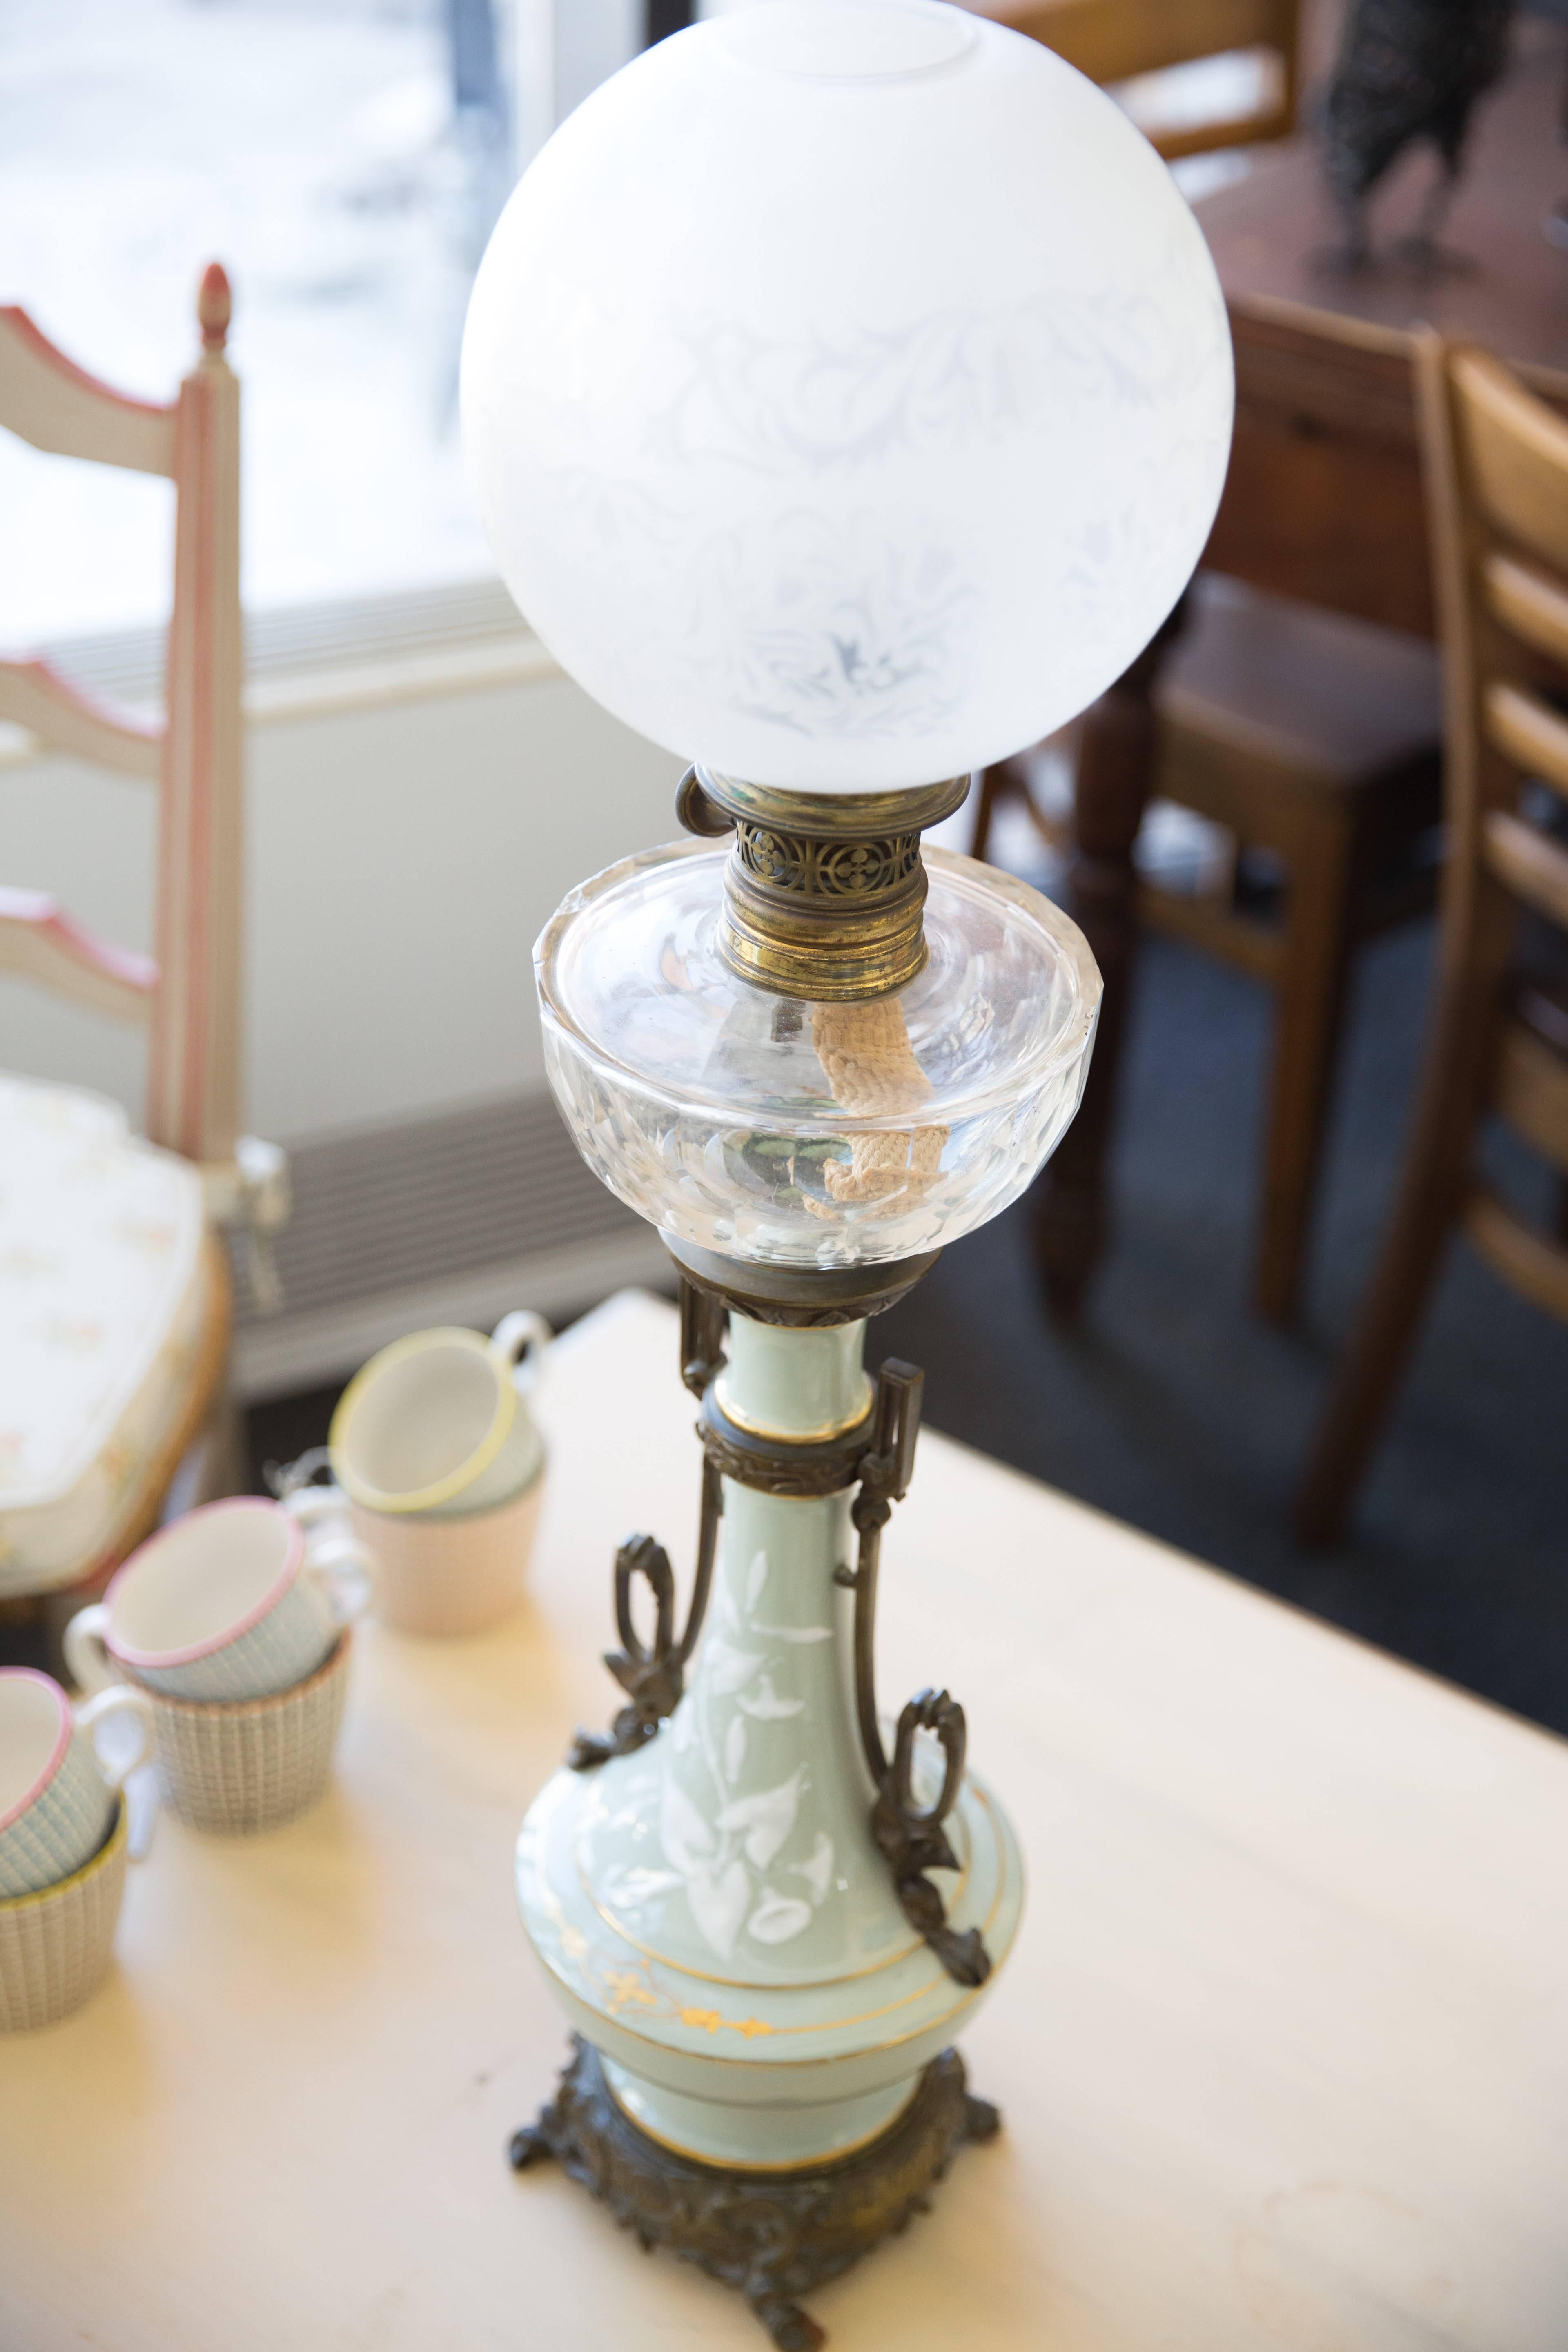 20th Century Exceptional Porcelain Lamp with Original Oil Burner, circa 1900 For Sale